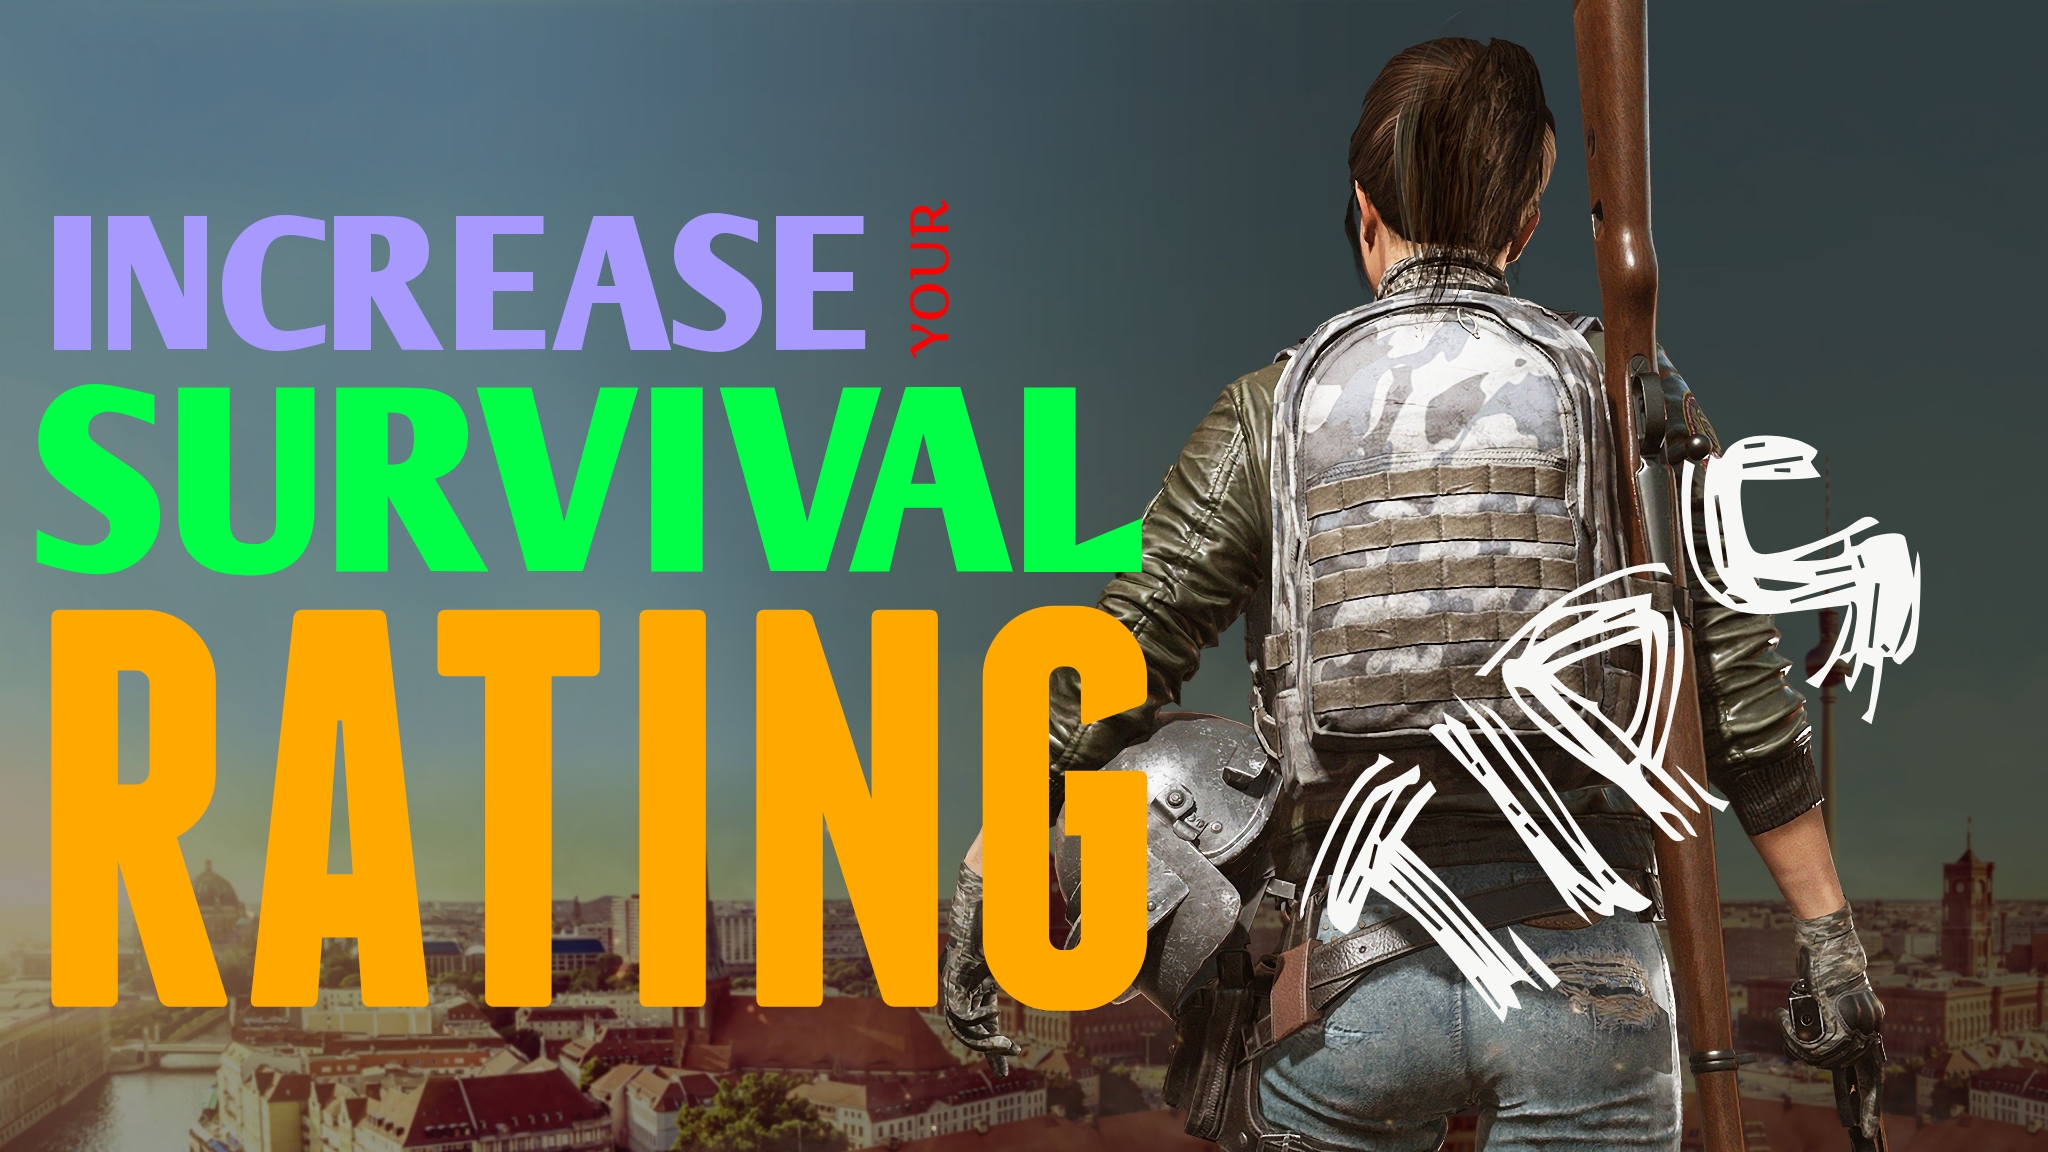 rules of survival ranking system